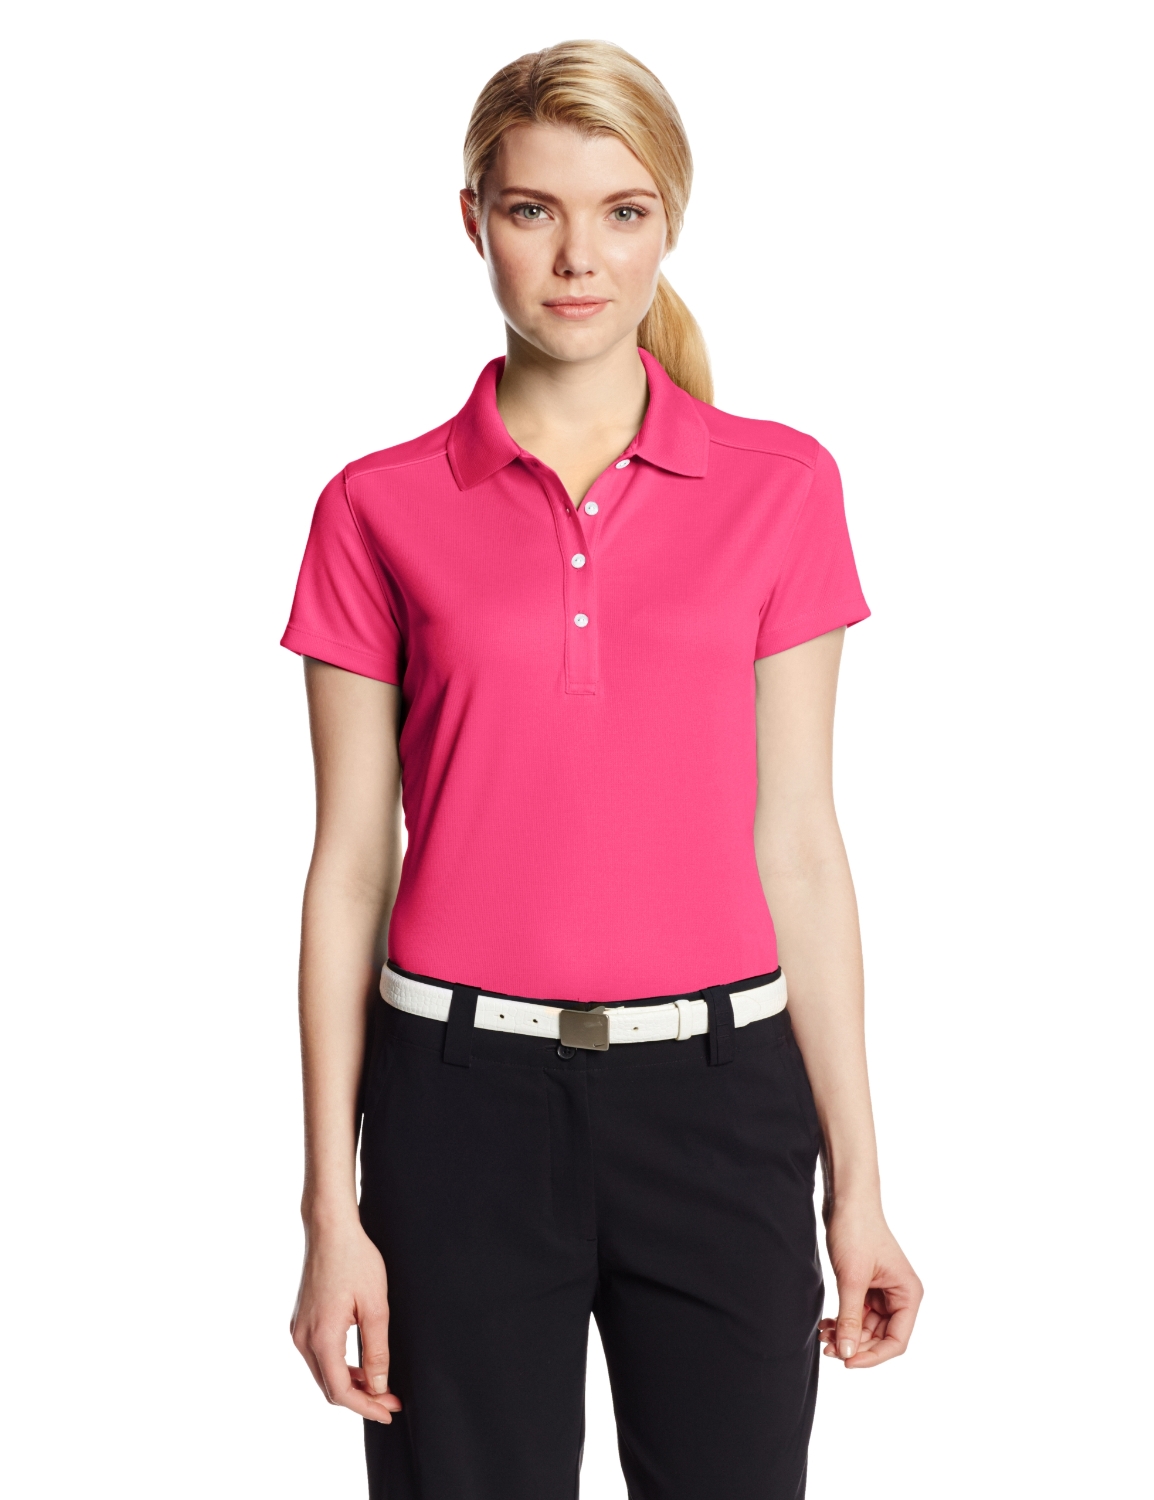 Womens Solid Double Knit Short Sleeve Golf Polo Shirts